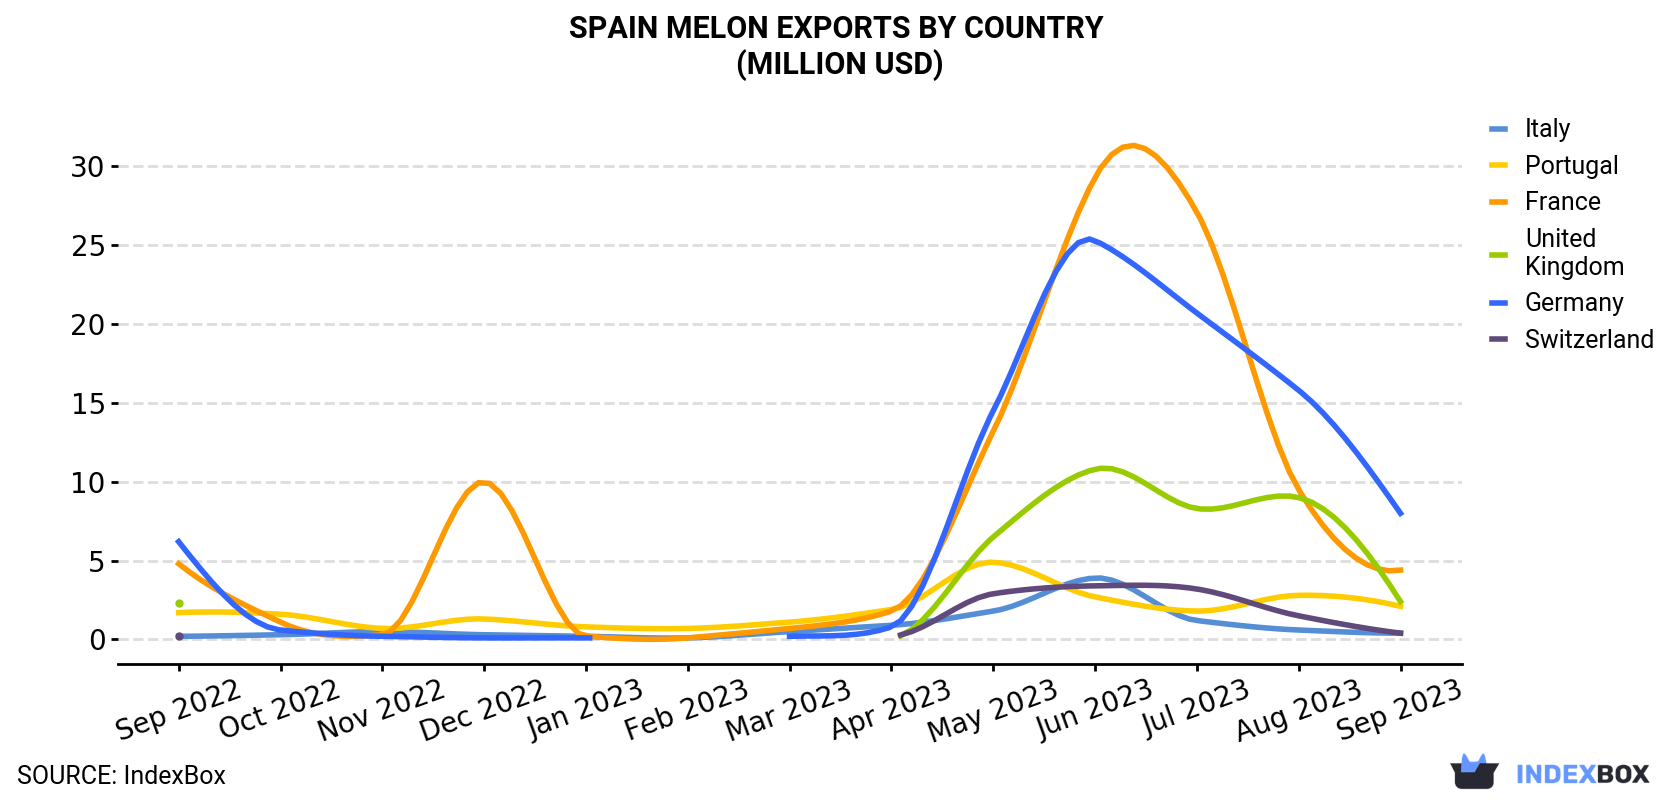 Spain Melon Exports By Country (Million USD)